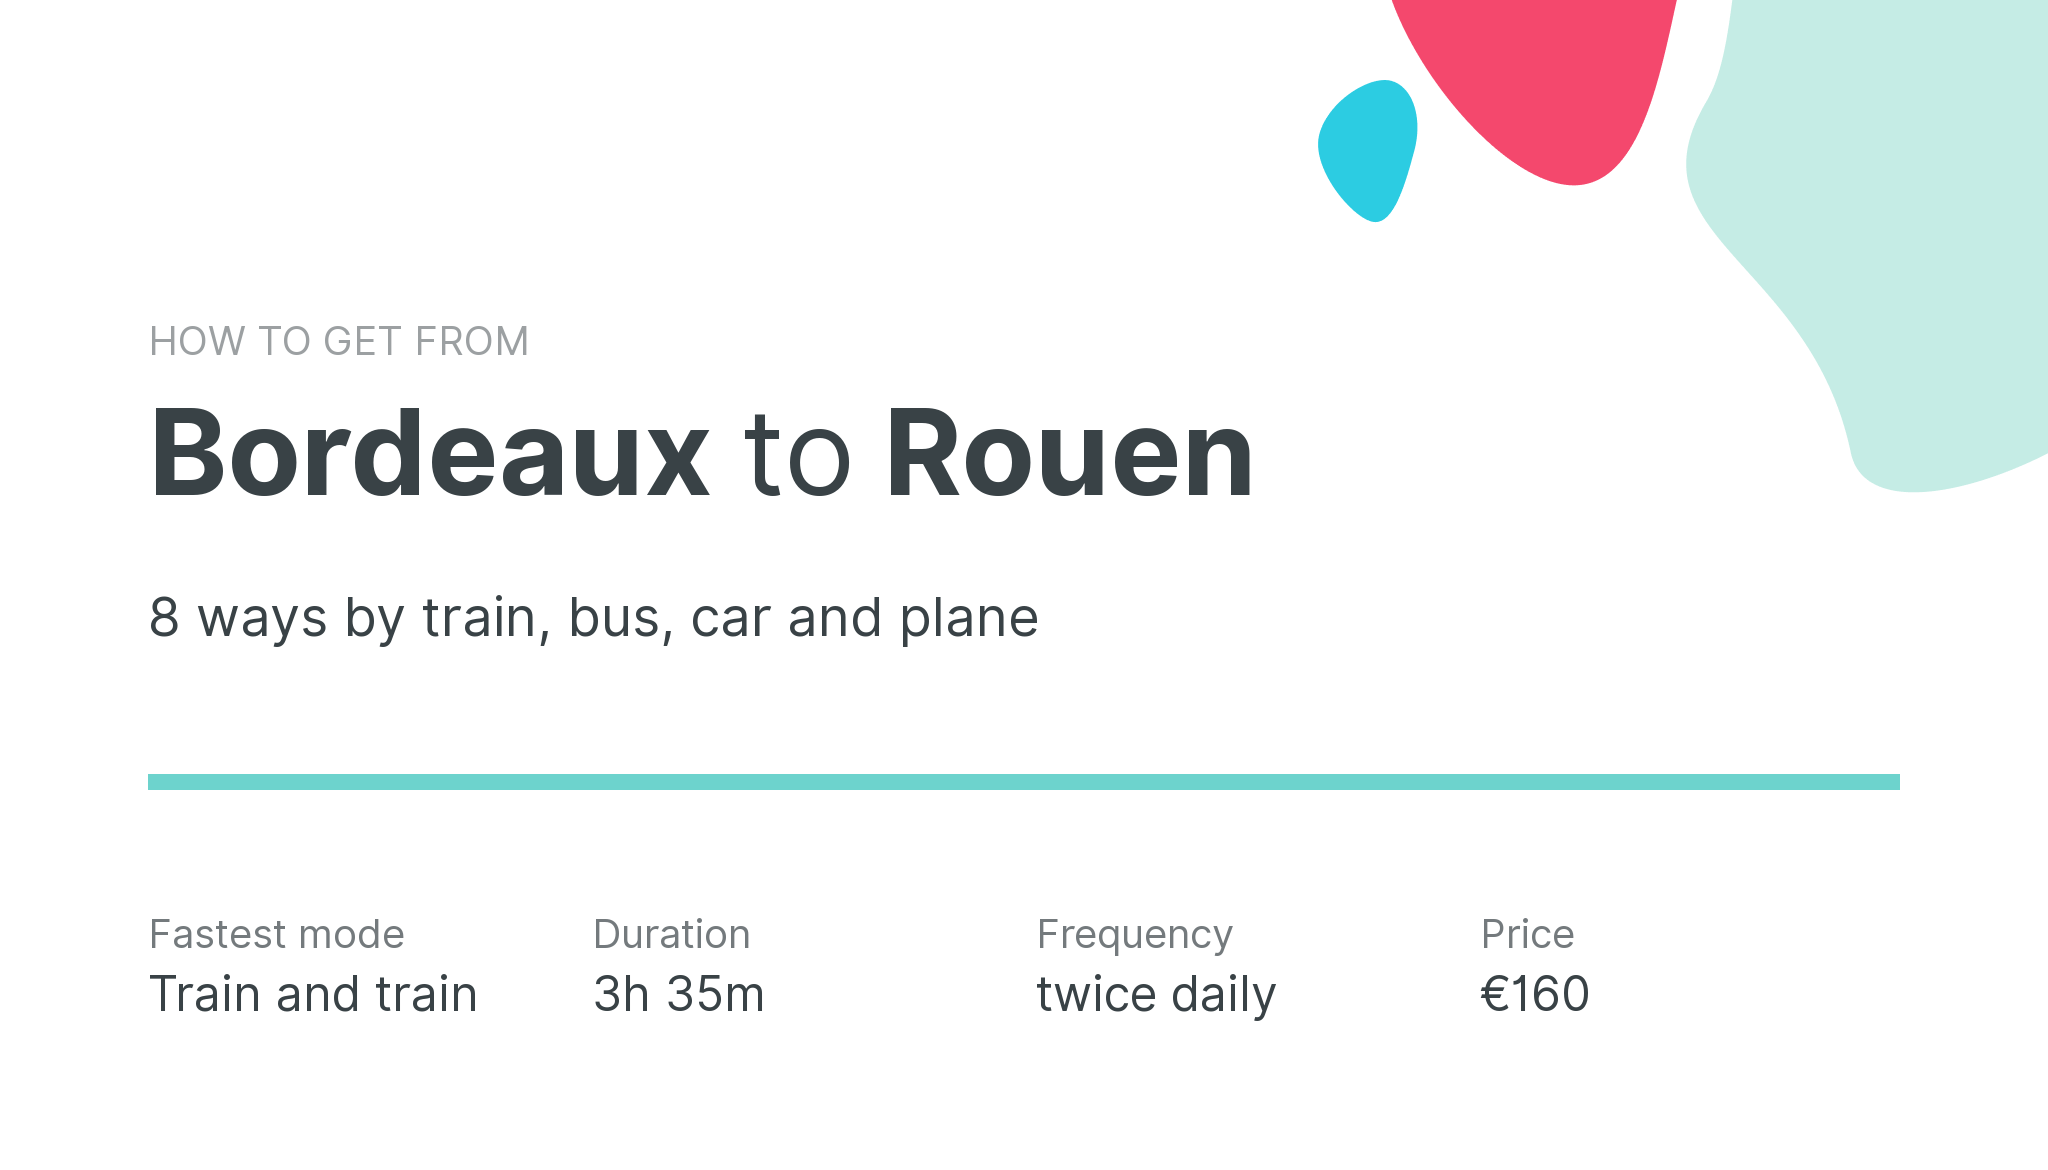 How do I get from Bordeaux to Rouen